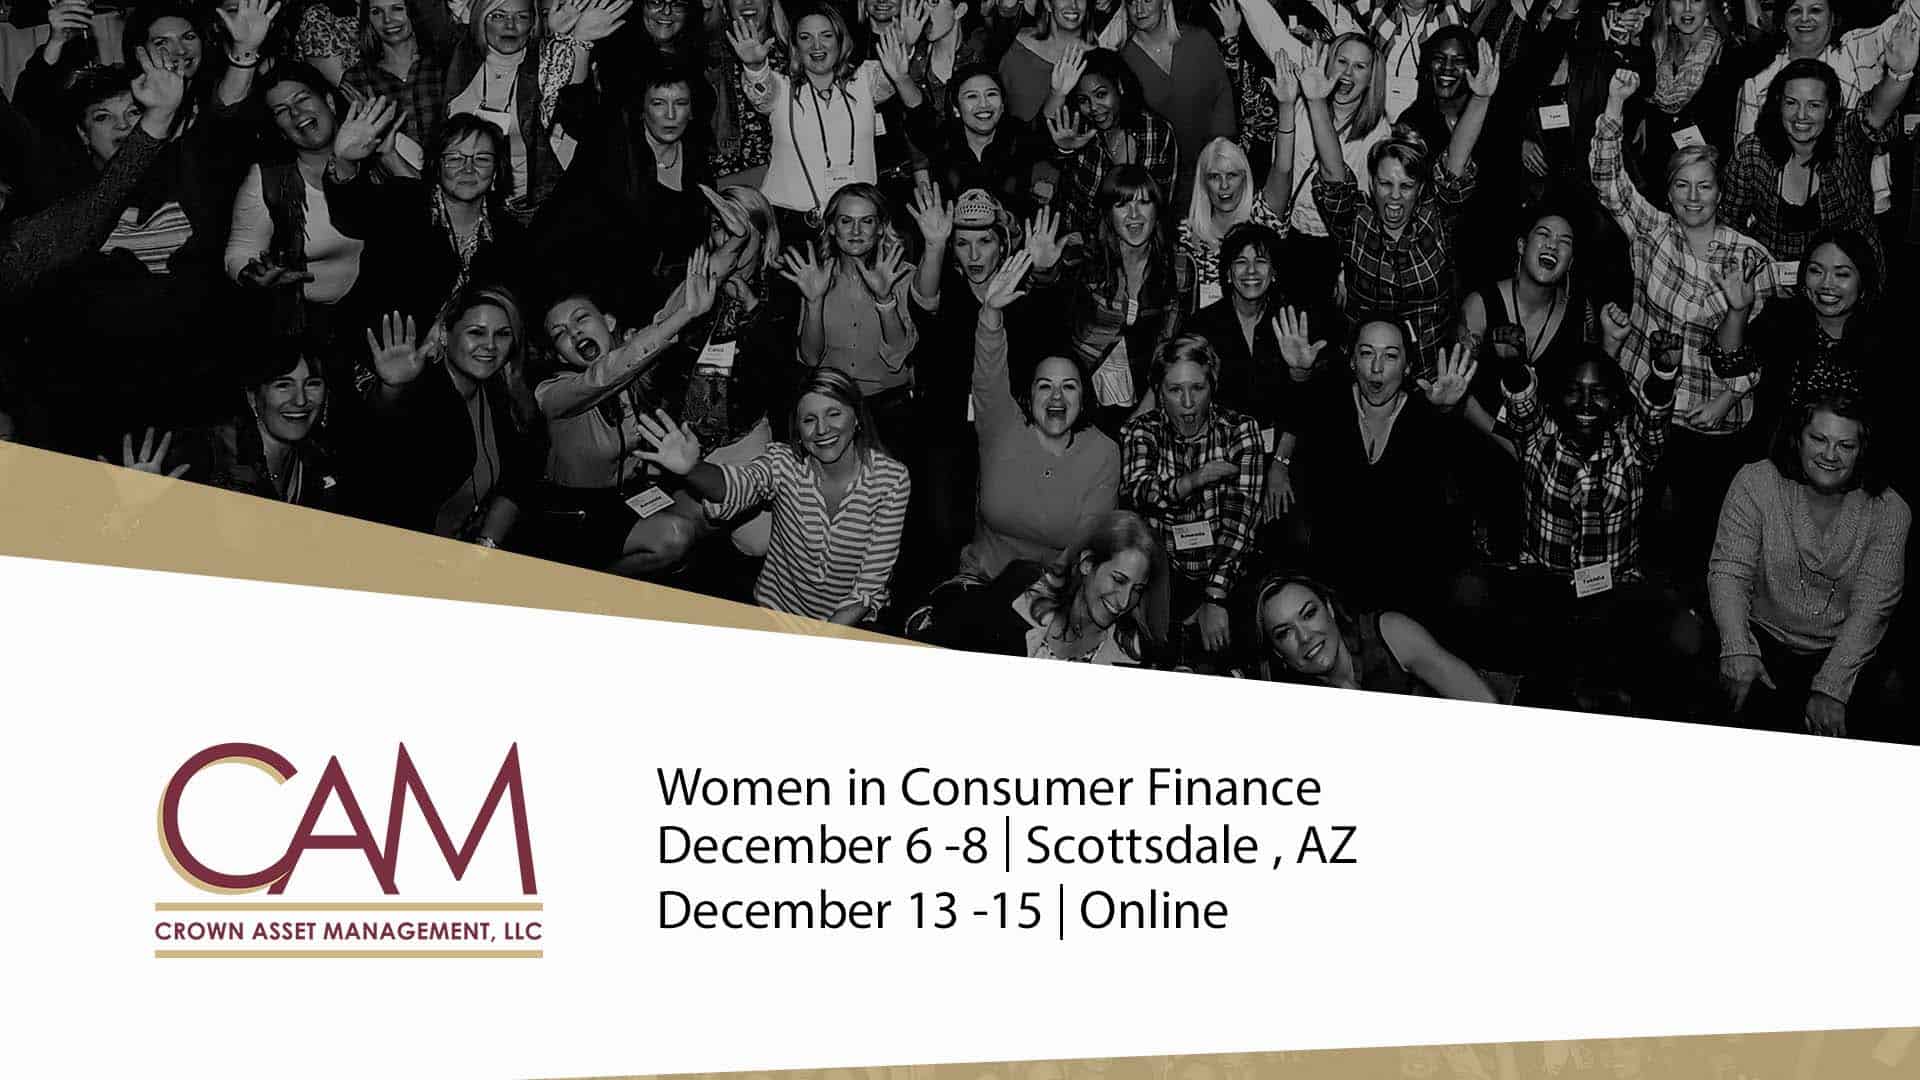 Crown Asset Management, LLC (CAM), is proud to be a workshop sponsor of the upcoming Women in Consumer Finance conference.